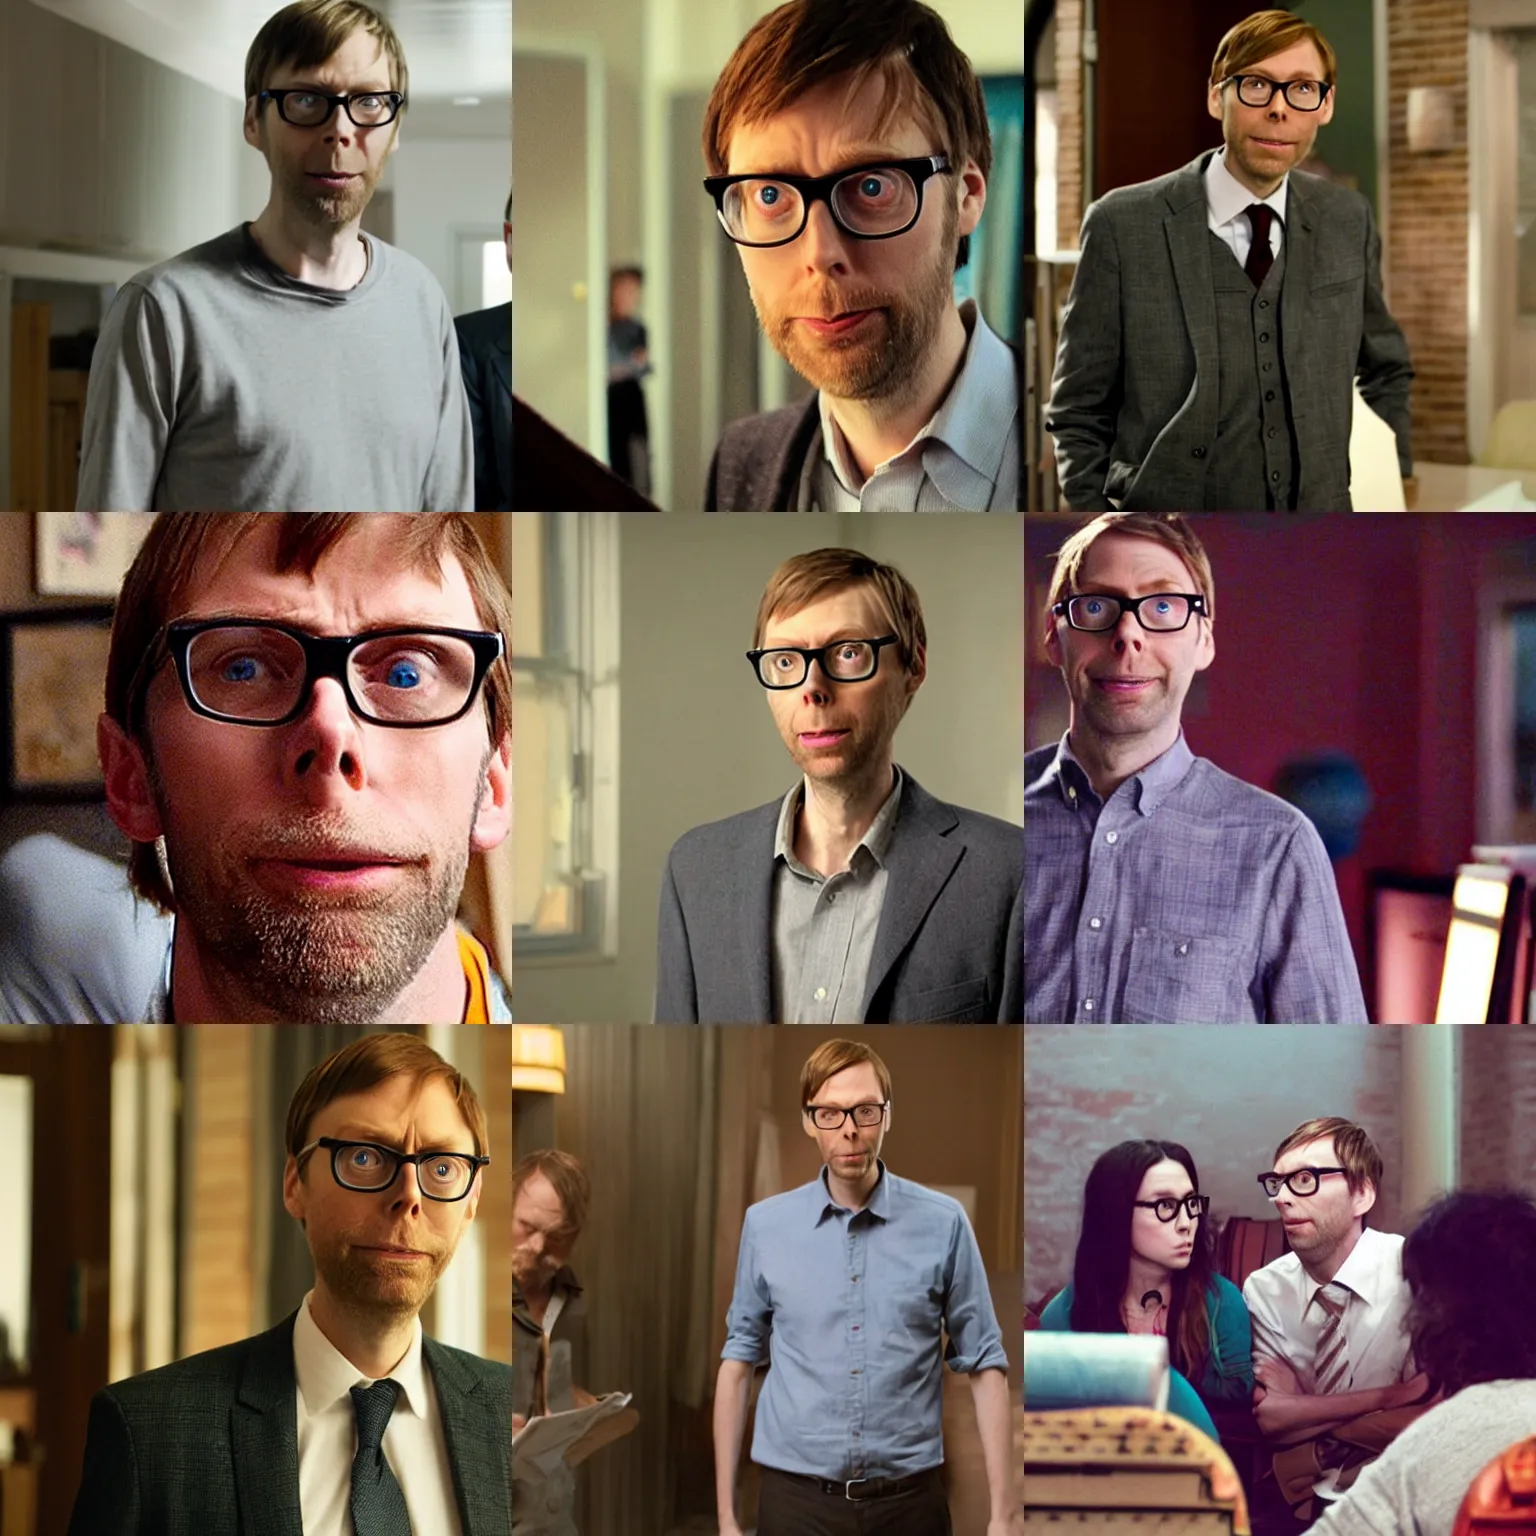 Prompt: film still from a movie featuring Stephen Merchant